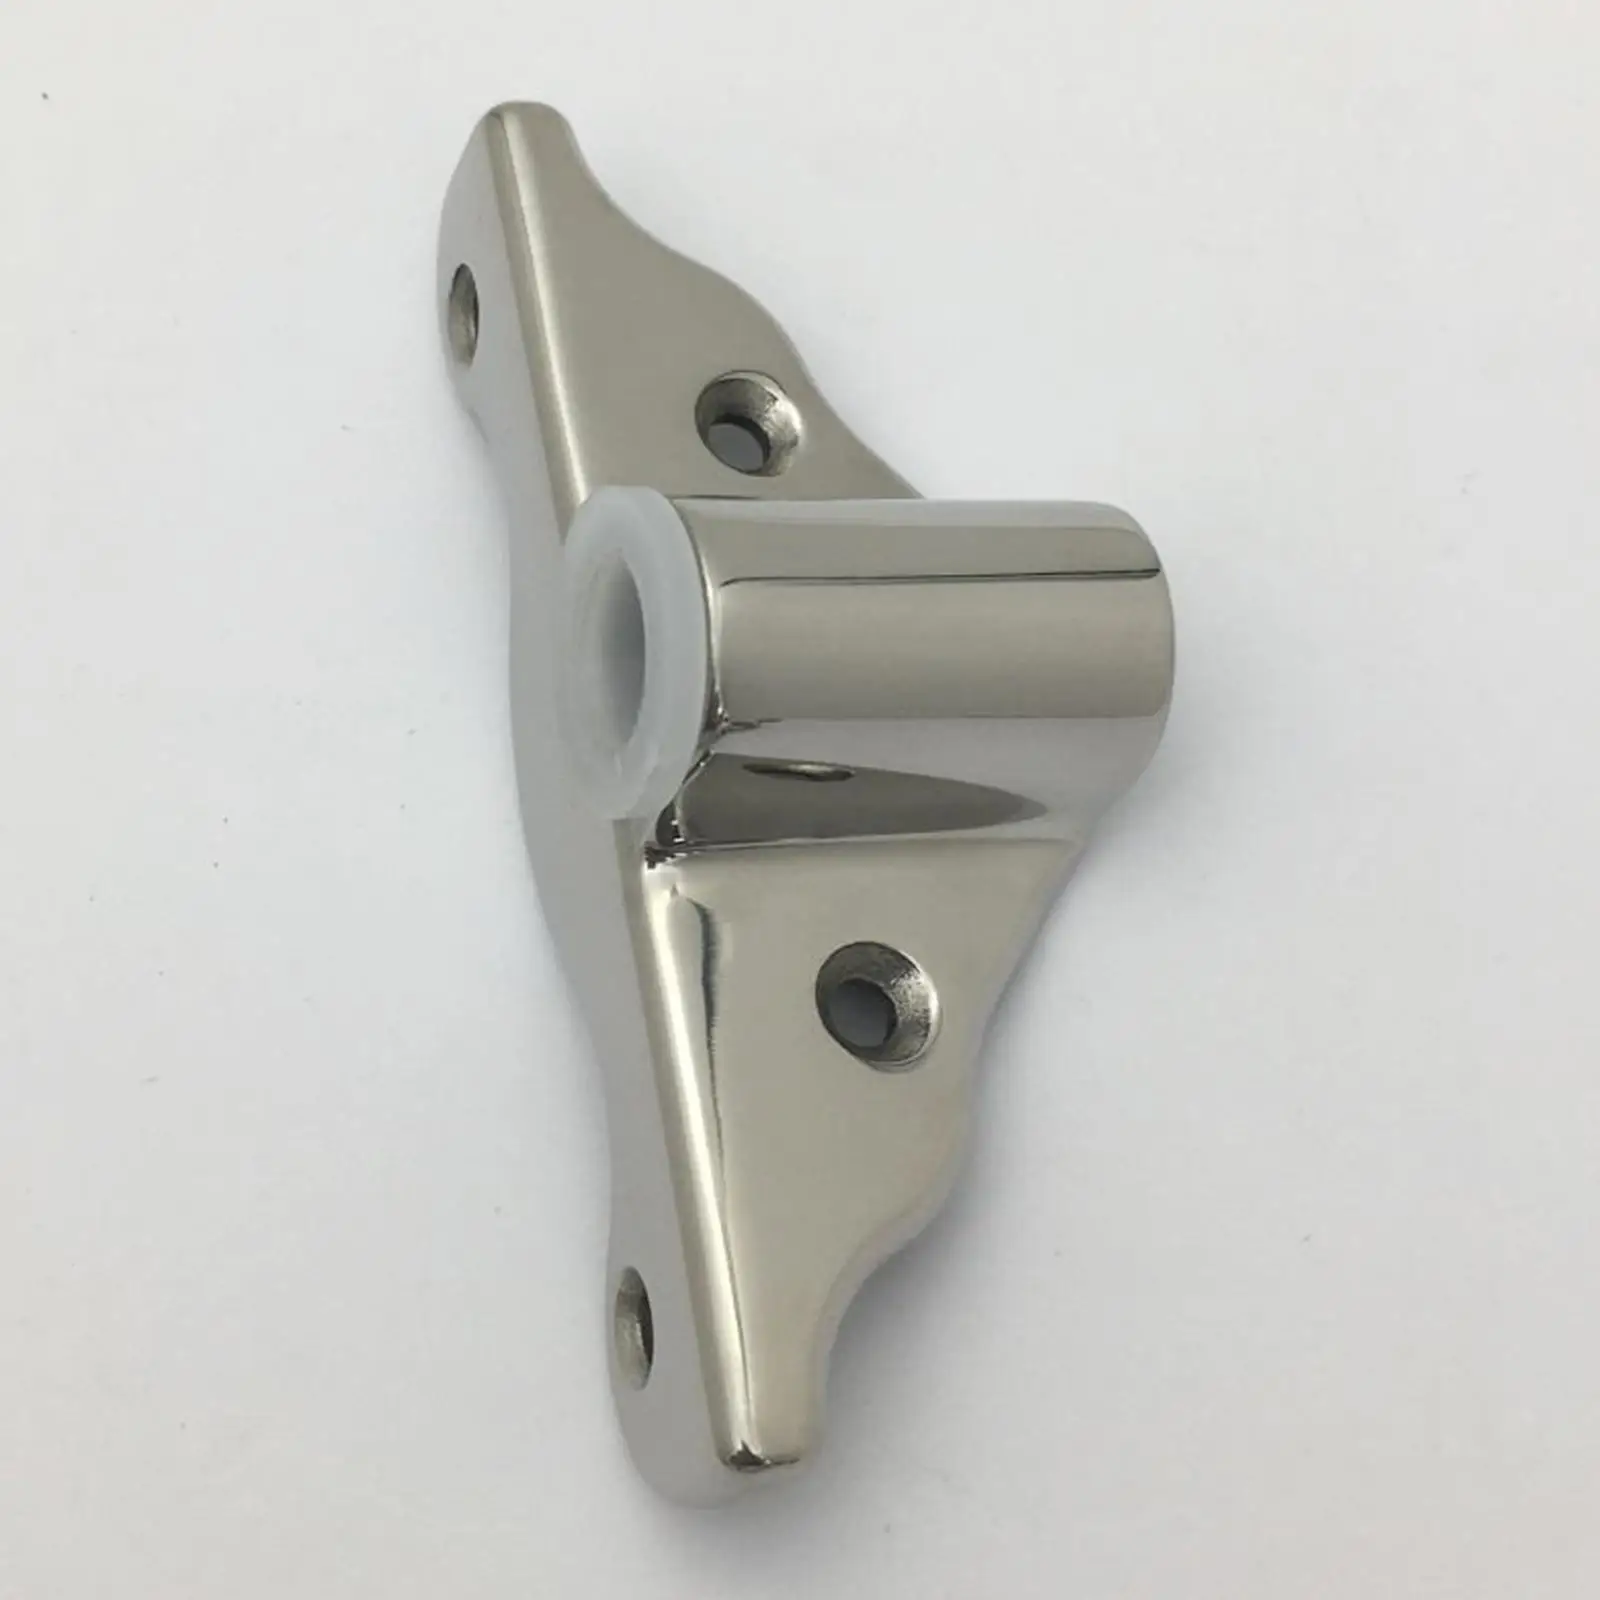 Side Mount Rowlock Oarlock Support Bracket Stainless Steel Easily Install for Sailing Deck Hardware 1/2 Inches Canoe Accessories